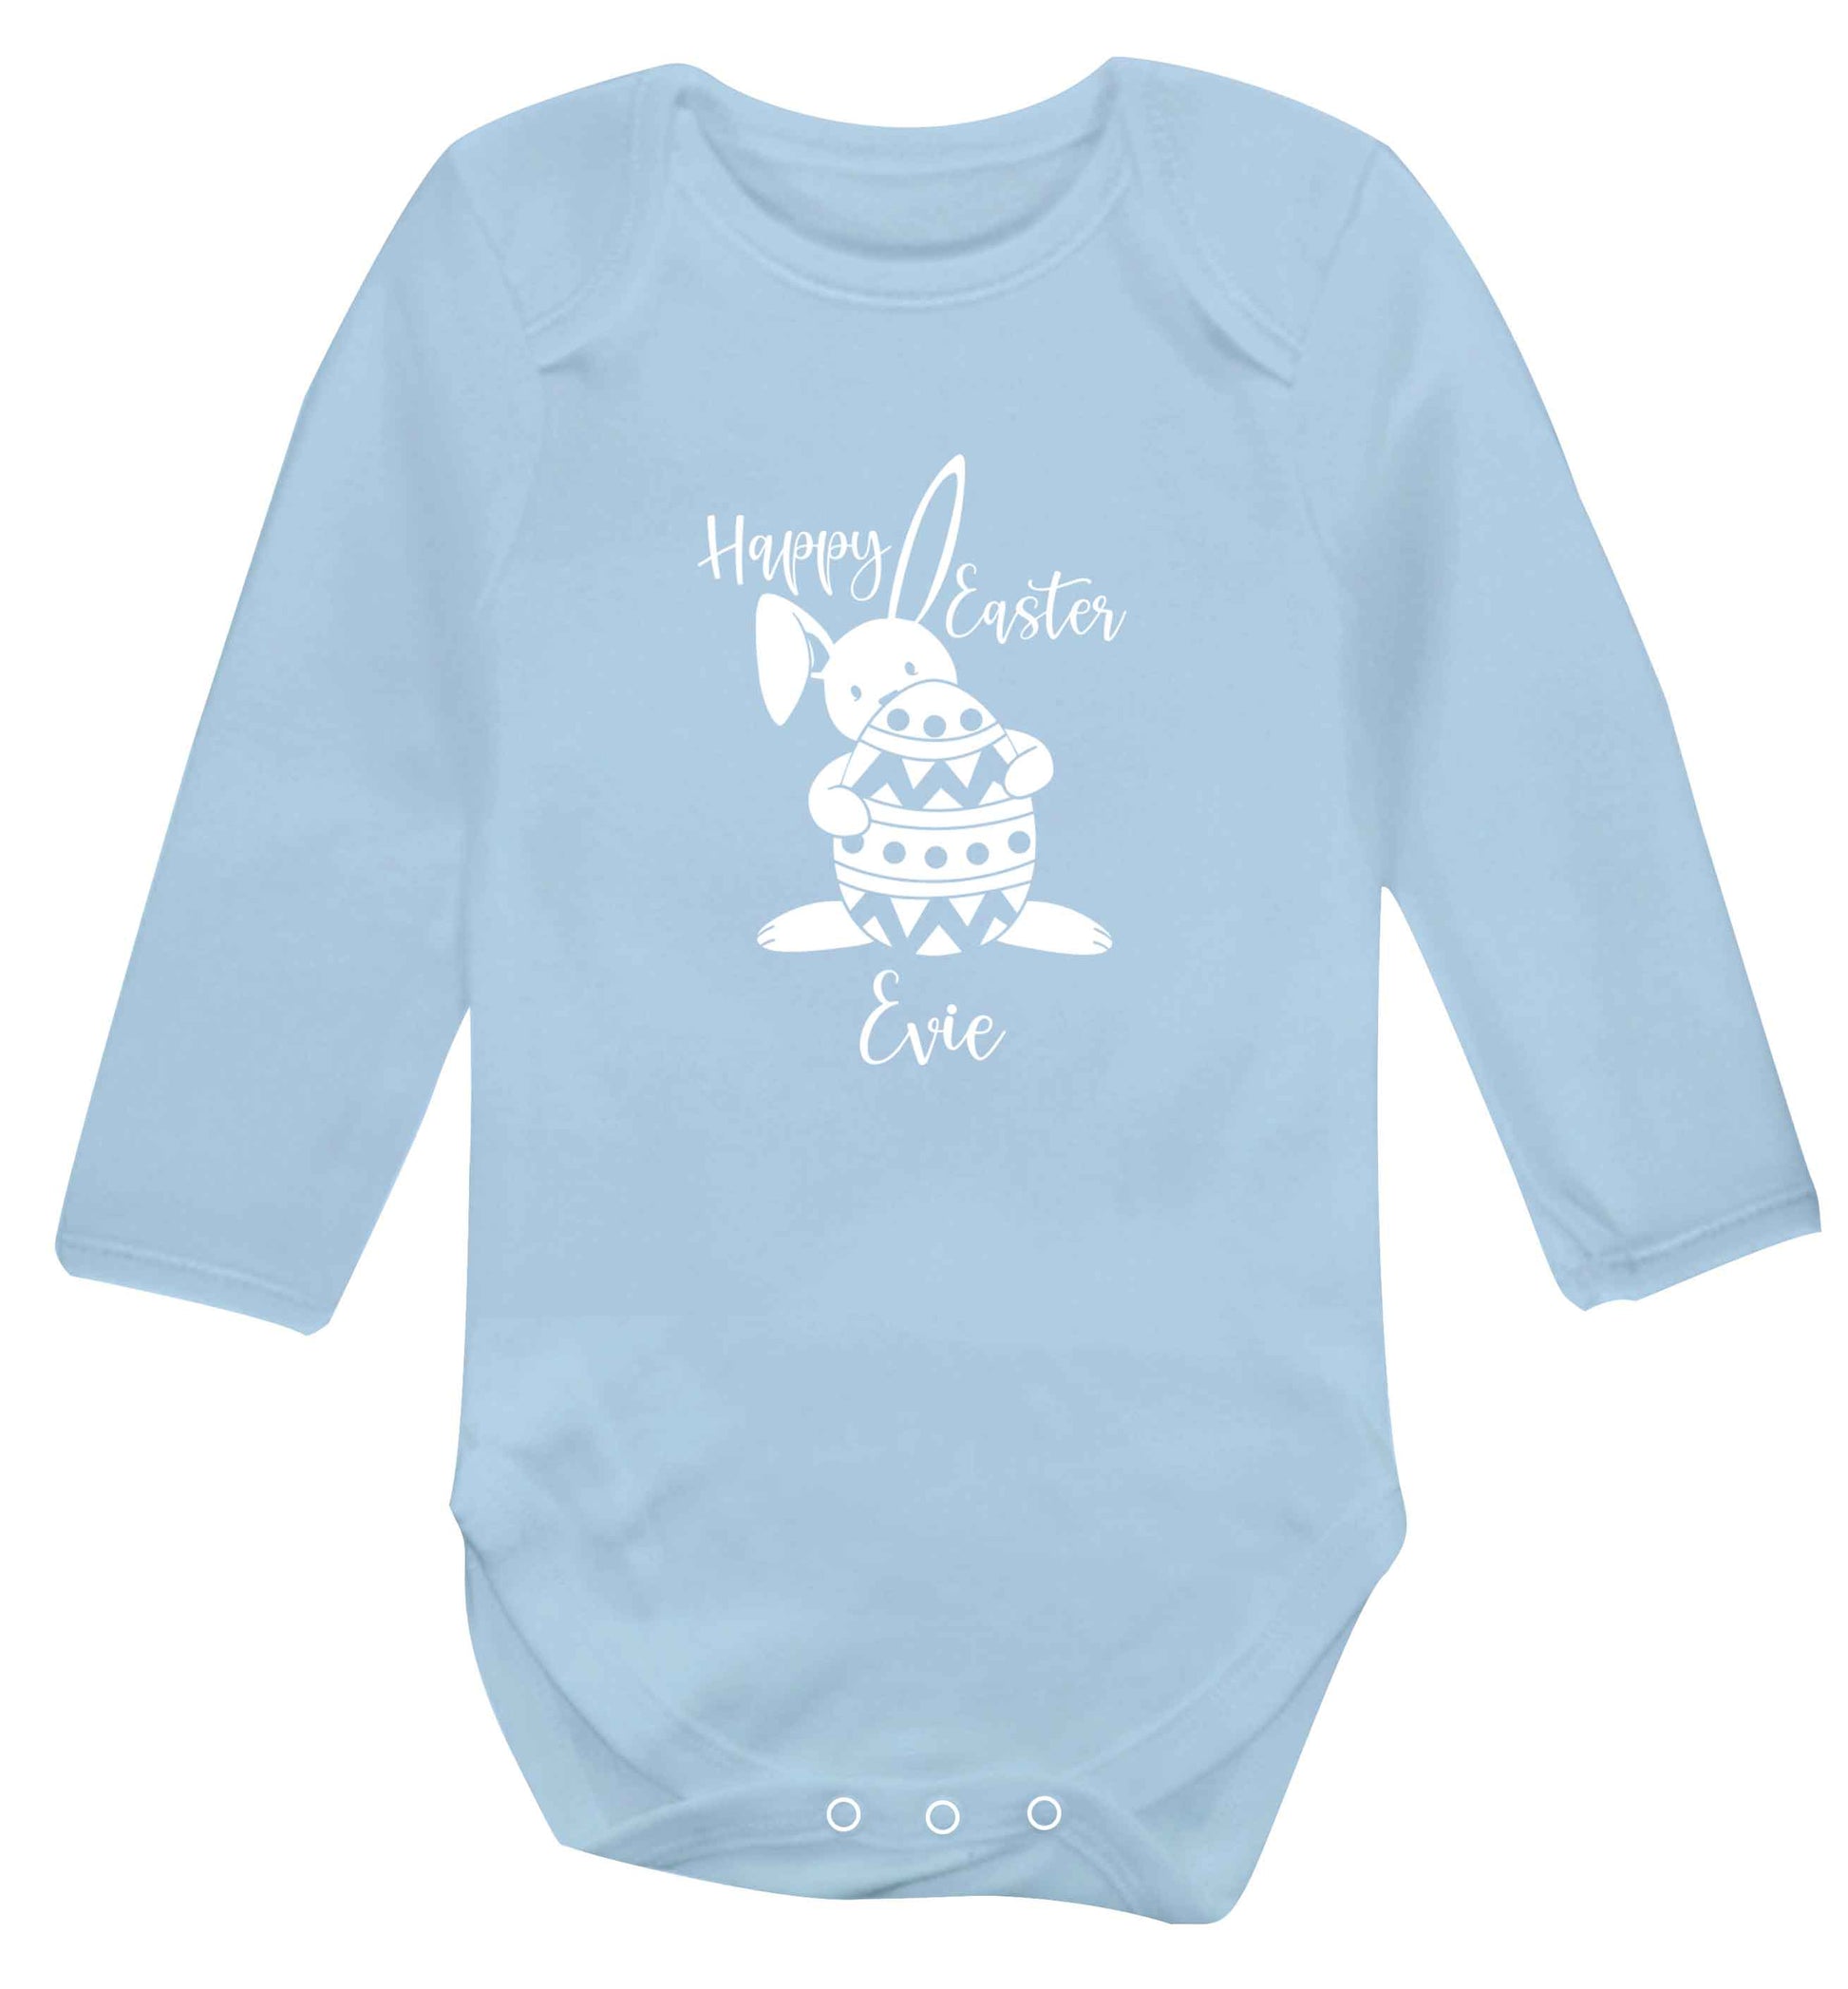 Happy Easter - personalised baby vest long sleeved pale blue 6-12 months